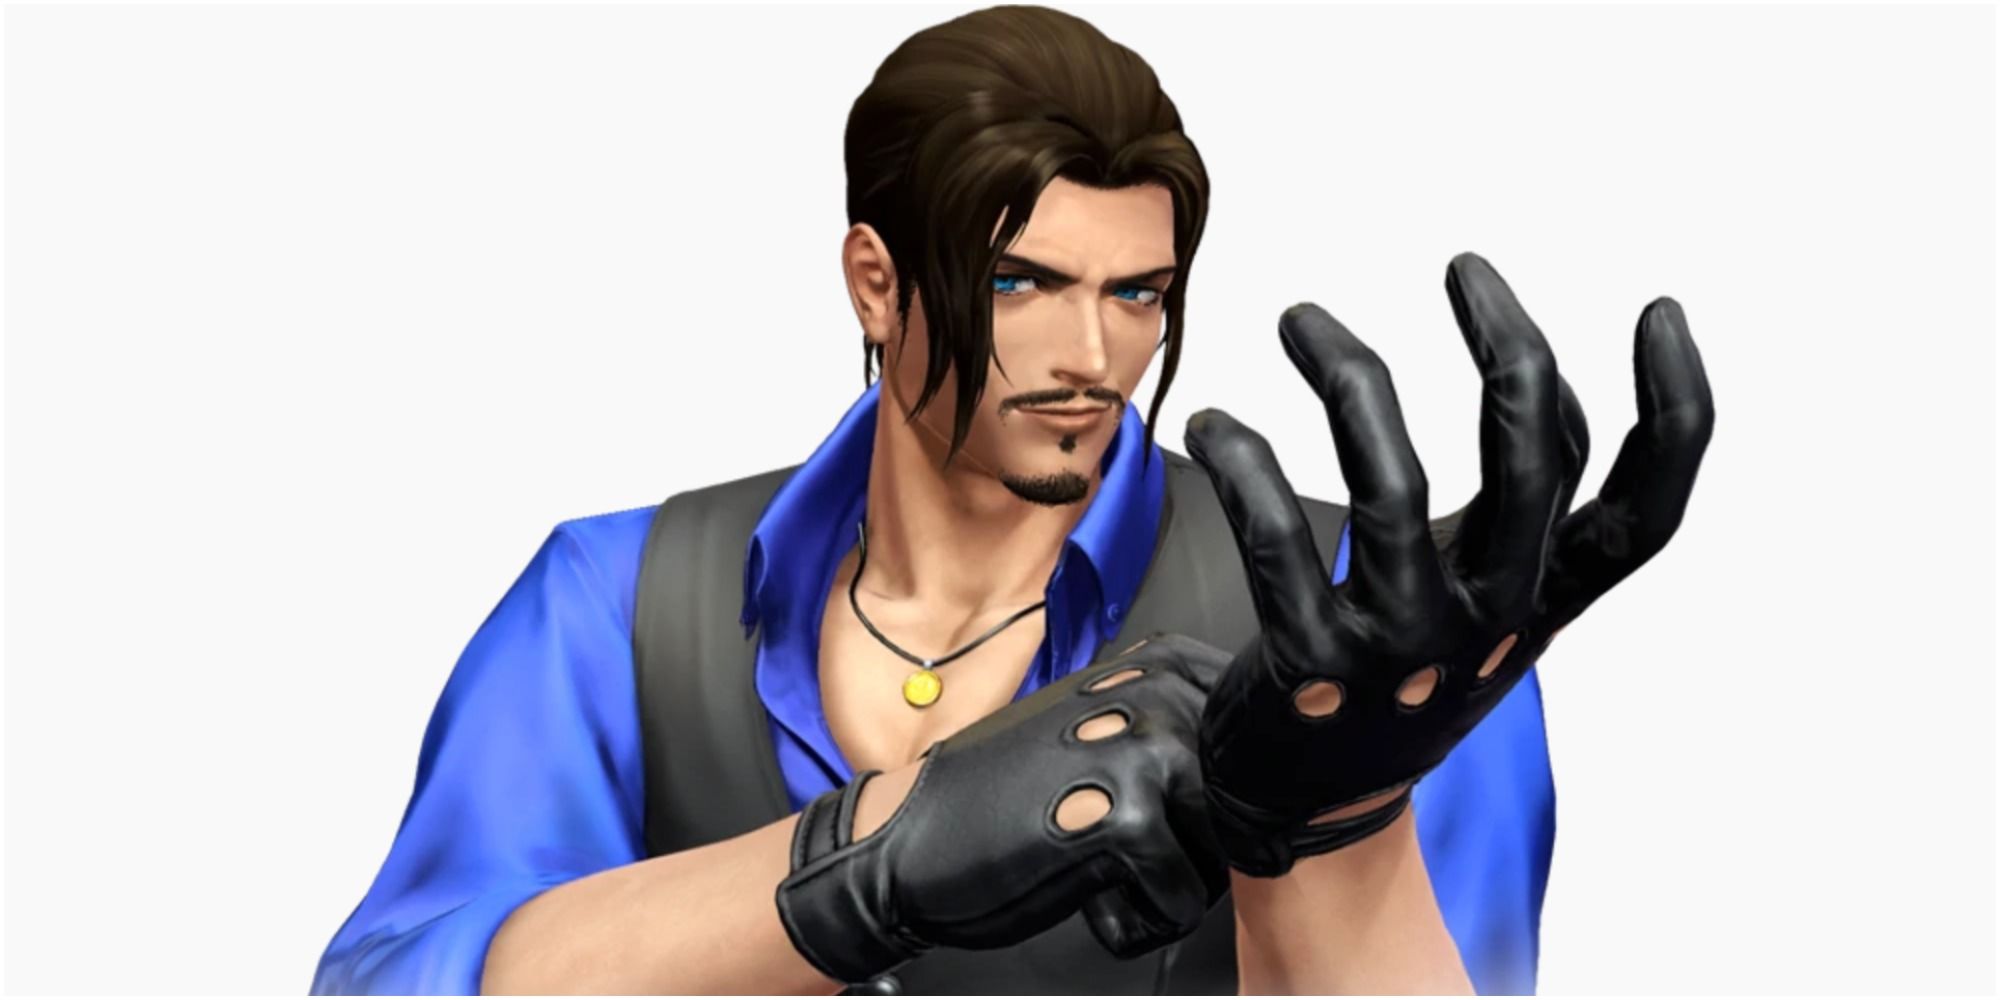 Robert Garcia from the King Of Fighters series